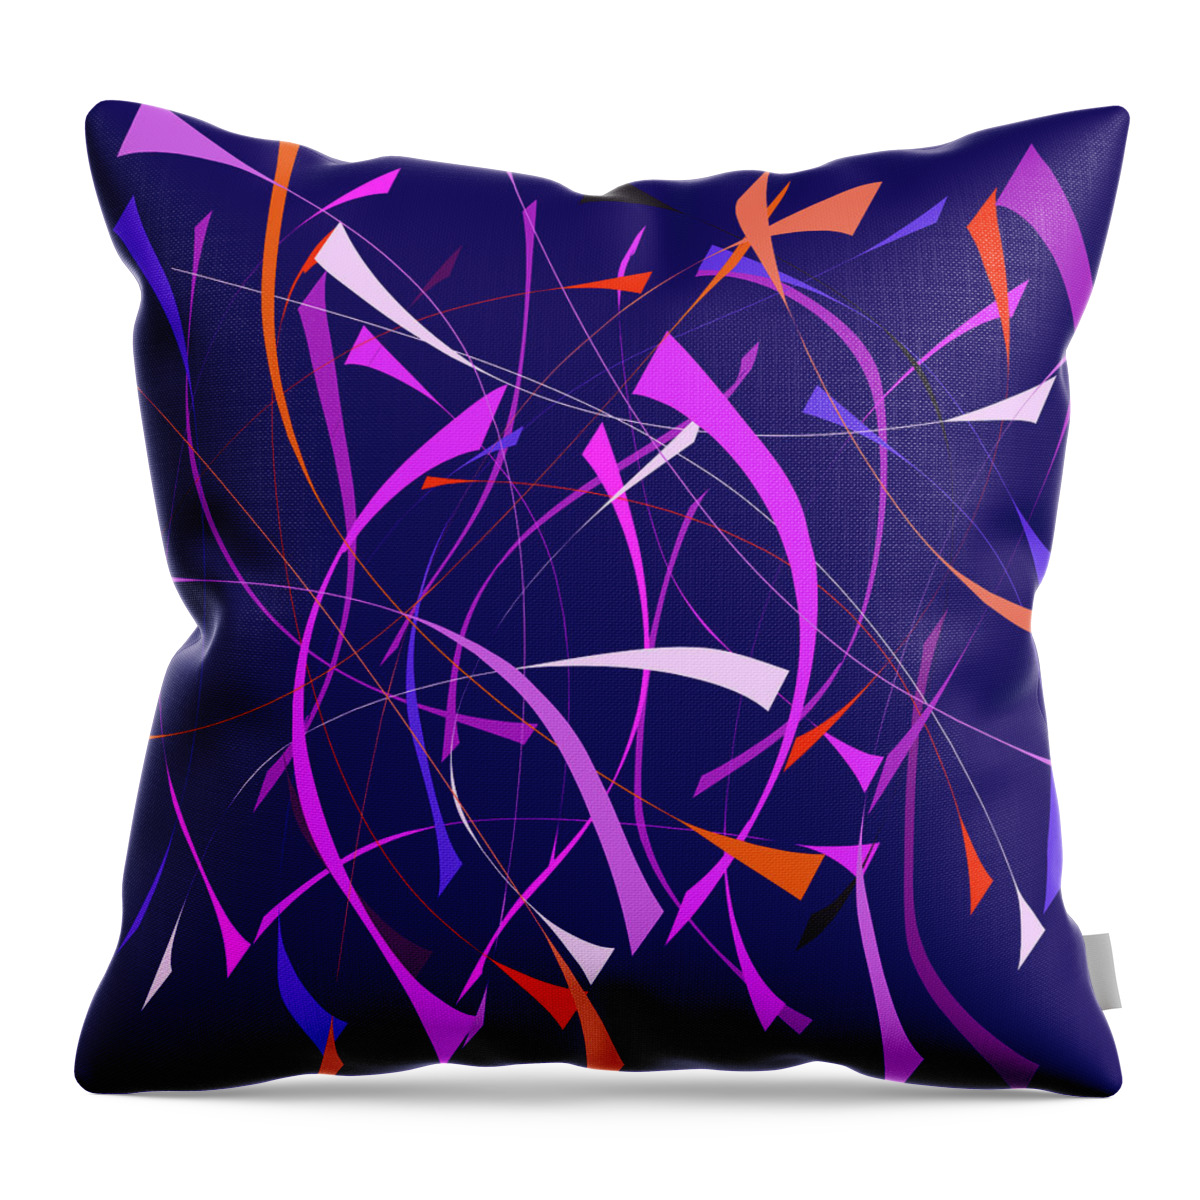 Lines Throw Pillow featuring the digital art Lines on Dark Blue by Mary Bedy